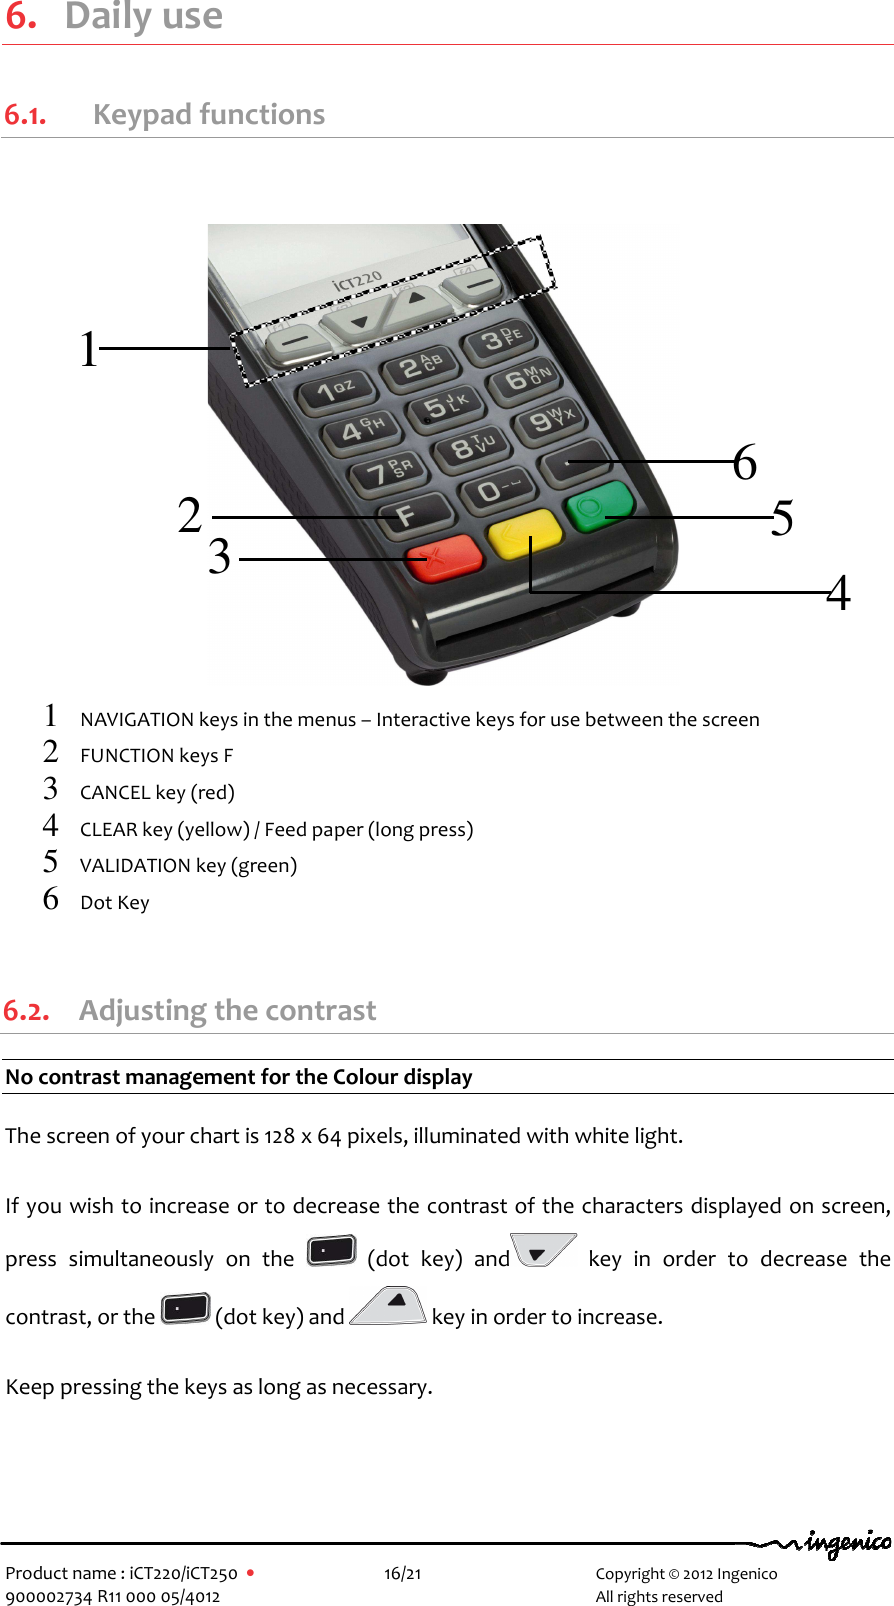   Product name : iCT220/iCT250  •    16/21       Copyright © 2012 Ingenico 900002734 R11 000 05/4012       All rights reserved  6. Daily use 6.1.   Keypad functions                    1 NAVIGATION keys in the menus – Interactive keys for use between the screen   2 FUNCTION keys F 3 CANCEL key (red) 4 CLEAR key (yellow) / Feed paper (long press) 5 VALIDATION key (green) 6 Dot Key   6.2. Adjusting the contrast No contrast management for the Colour display  The screen of your chart is 128 x 64 pixels, illuminated with white light.  If you wish to increase or to decrease the contrast of the characters displayed on screen, press  simultaneously  on  the    (dot  key)  and   key  in  order  to  decrease  the contrast, or the   (dot key) and   key in order to increase.  Keep pressing the keys as long as necessary.   1 2 3  4 5 6 